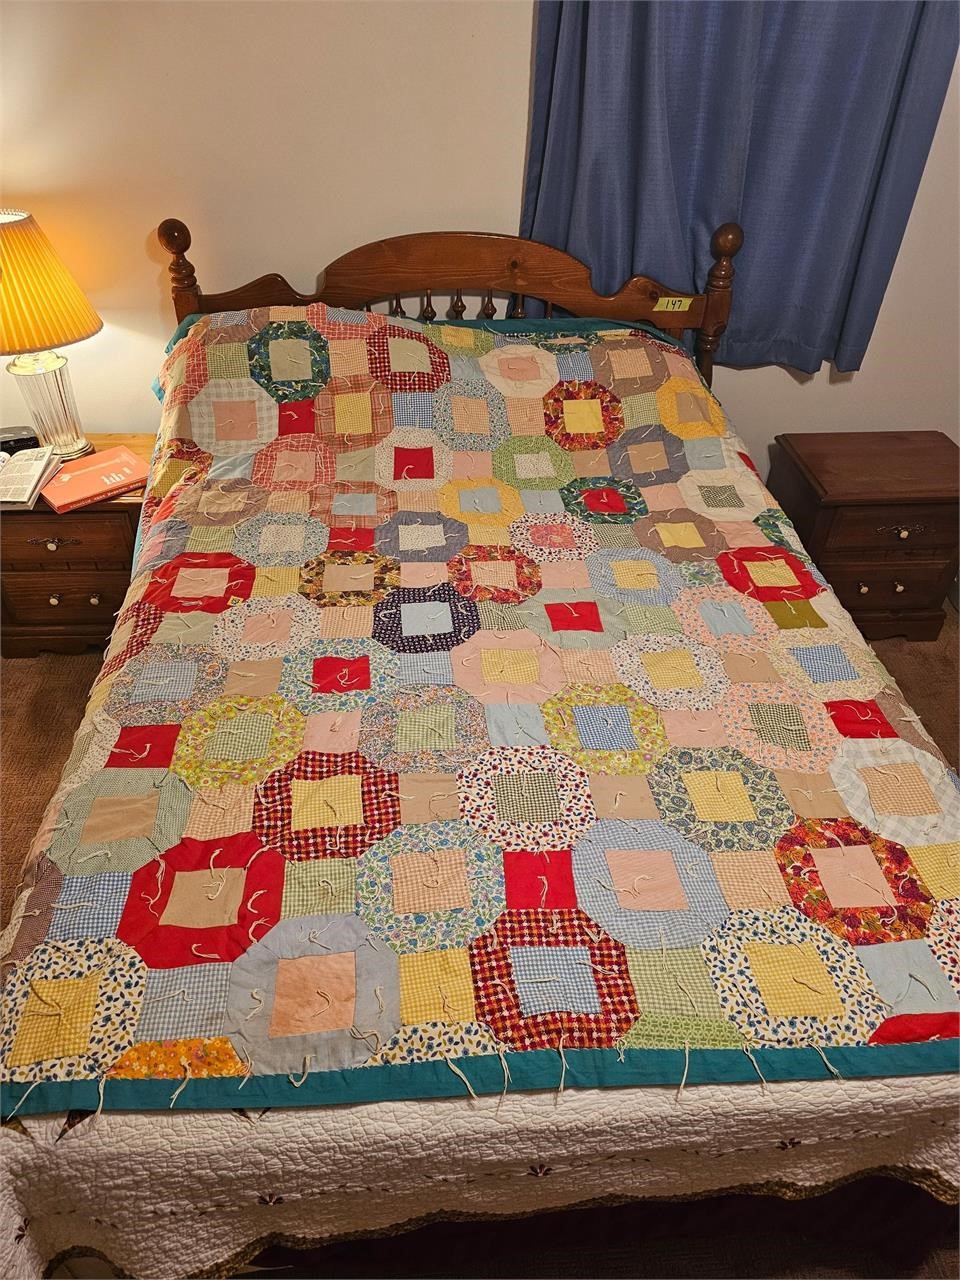 85x69" Antqiue hand stitched quilt